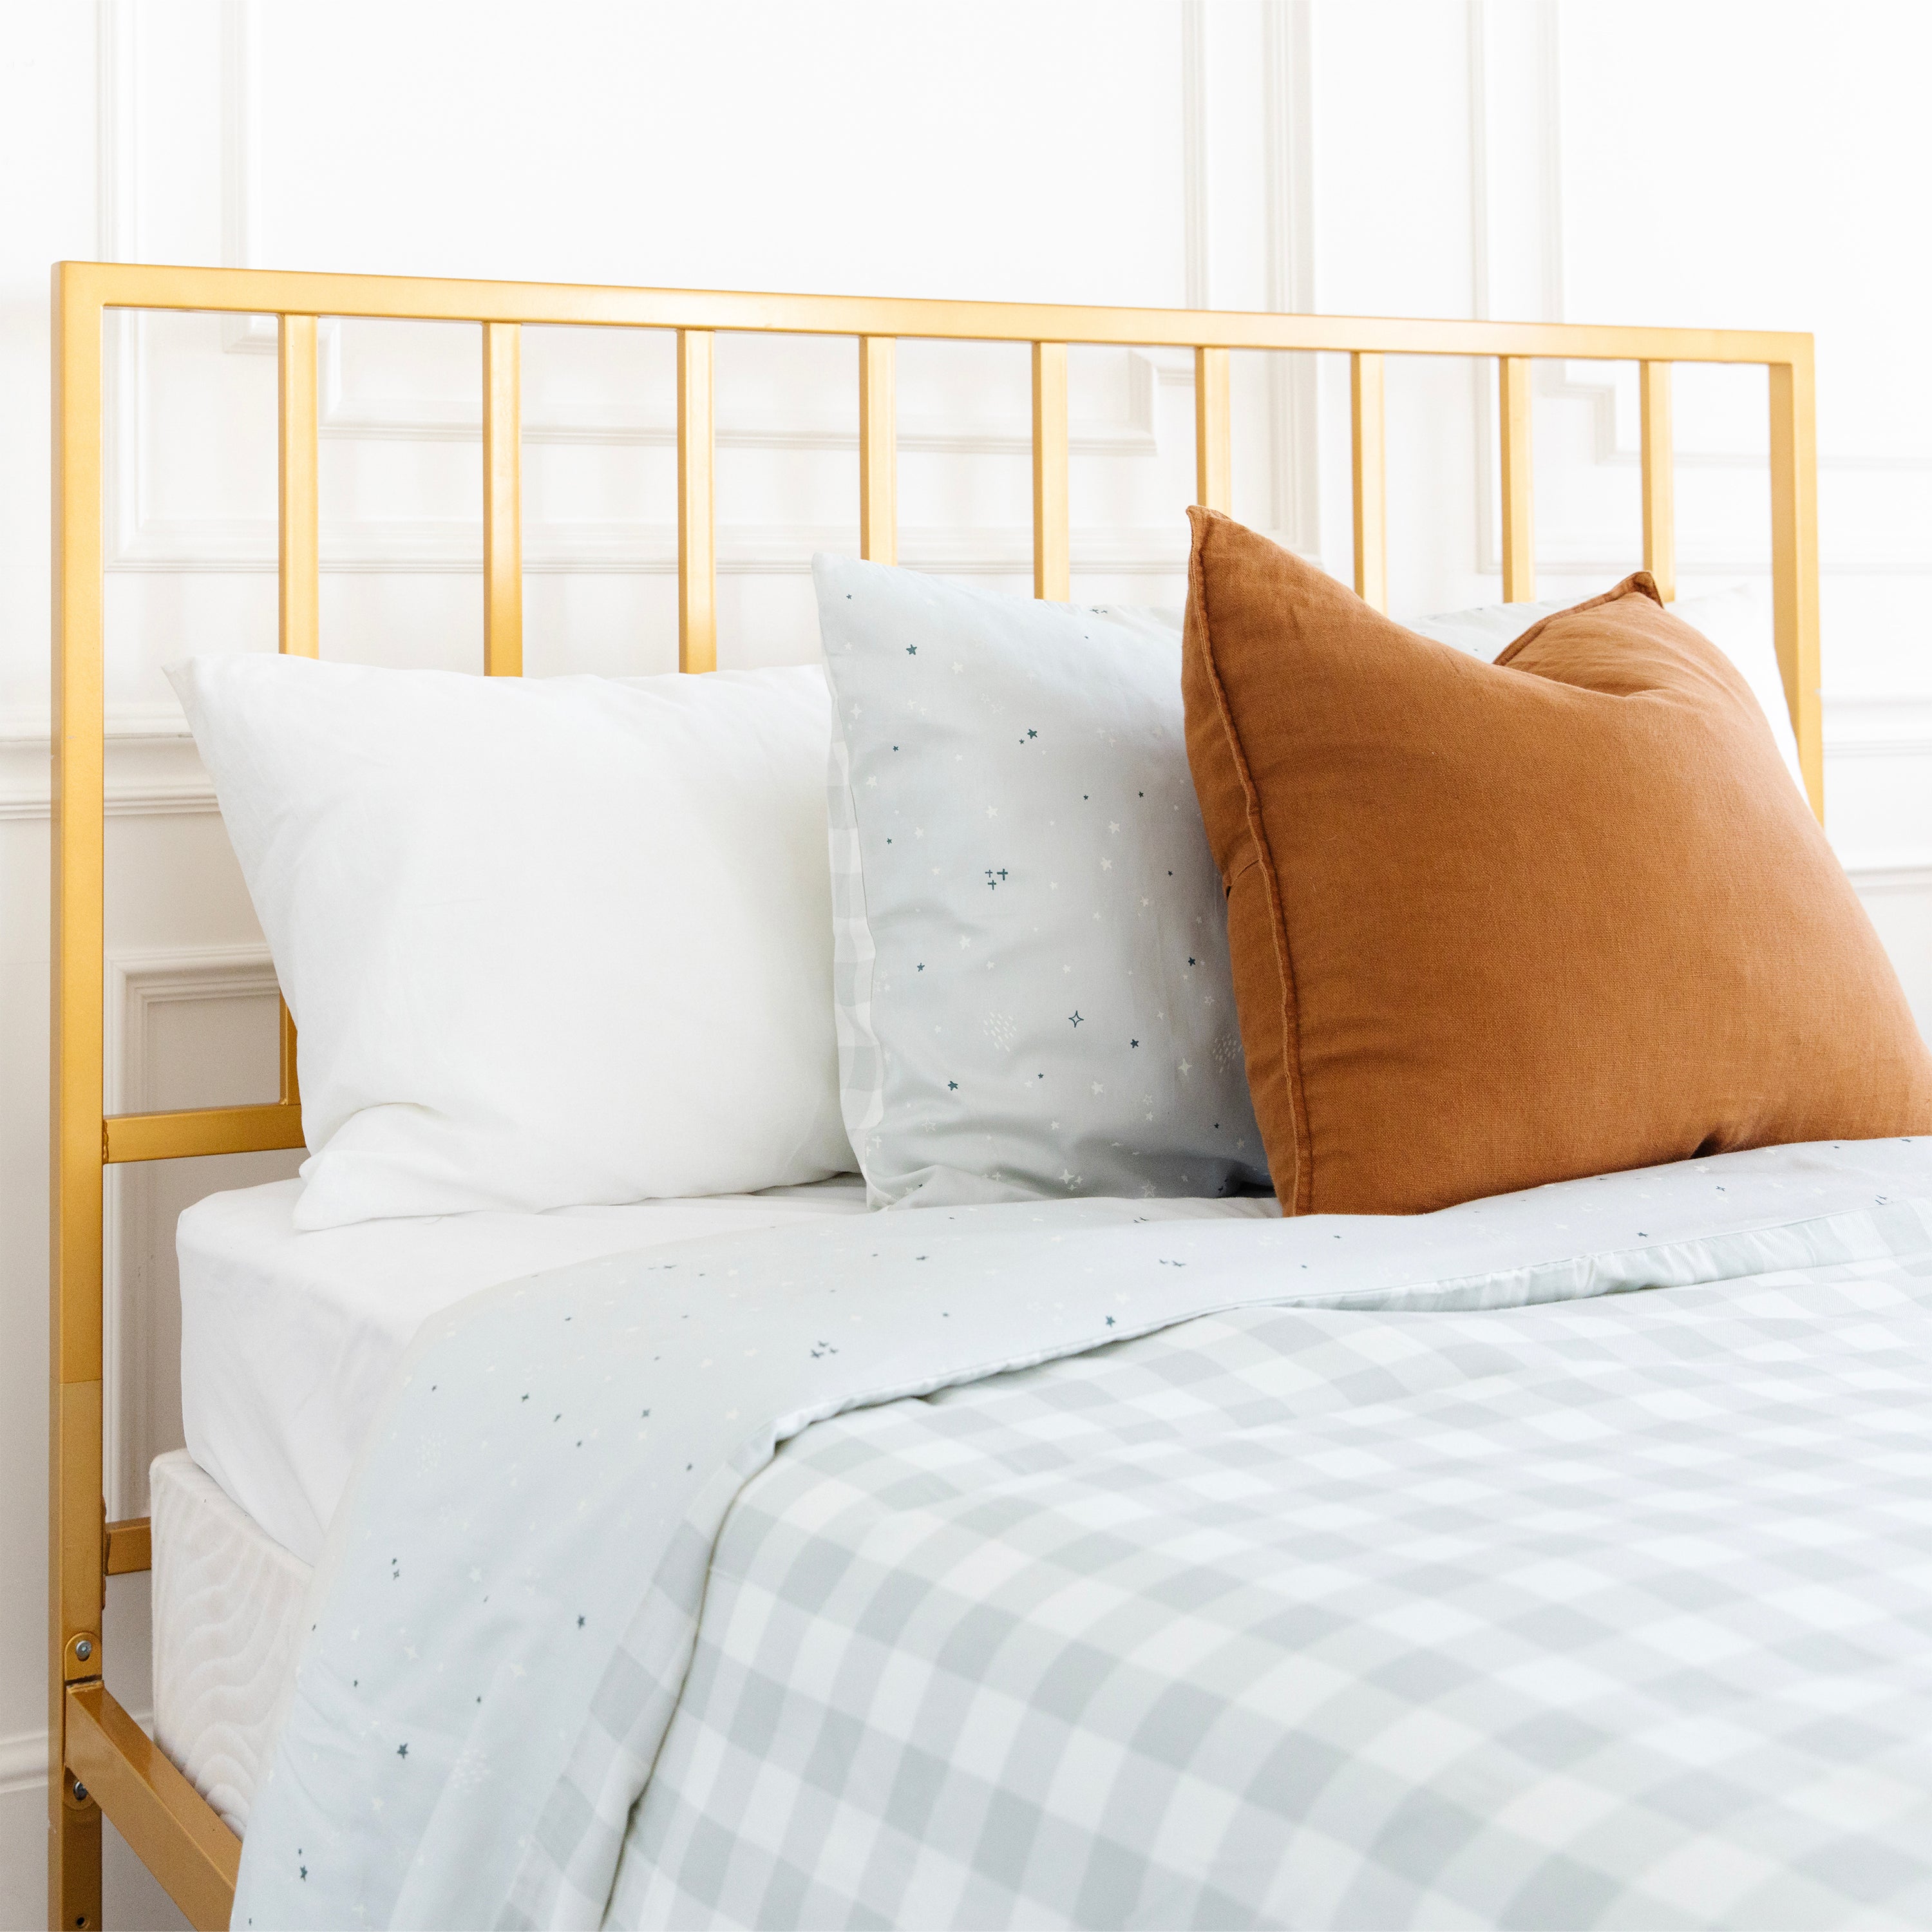 A neatly made bed with a gold-colored metal frame, featuring the Organic Duvet Cover - Milkyway & Gingham from Makemake Organics, complemented by white and brown pillows.